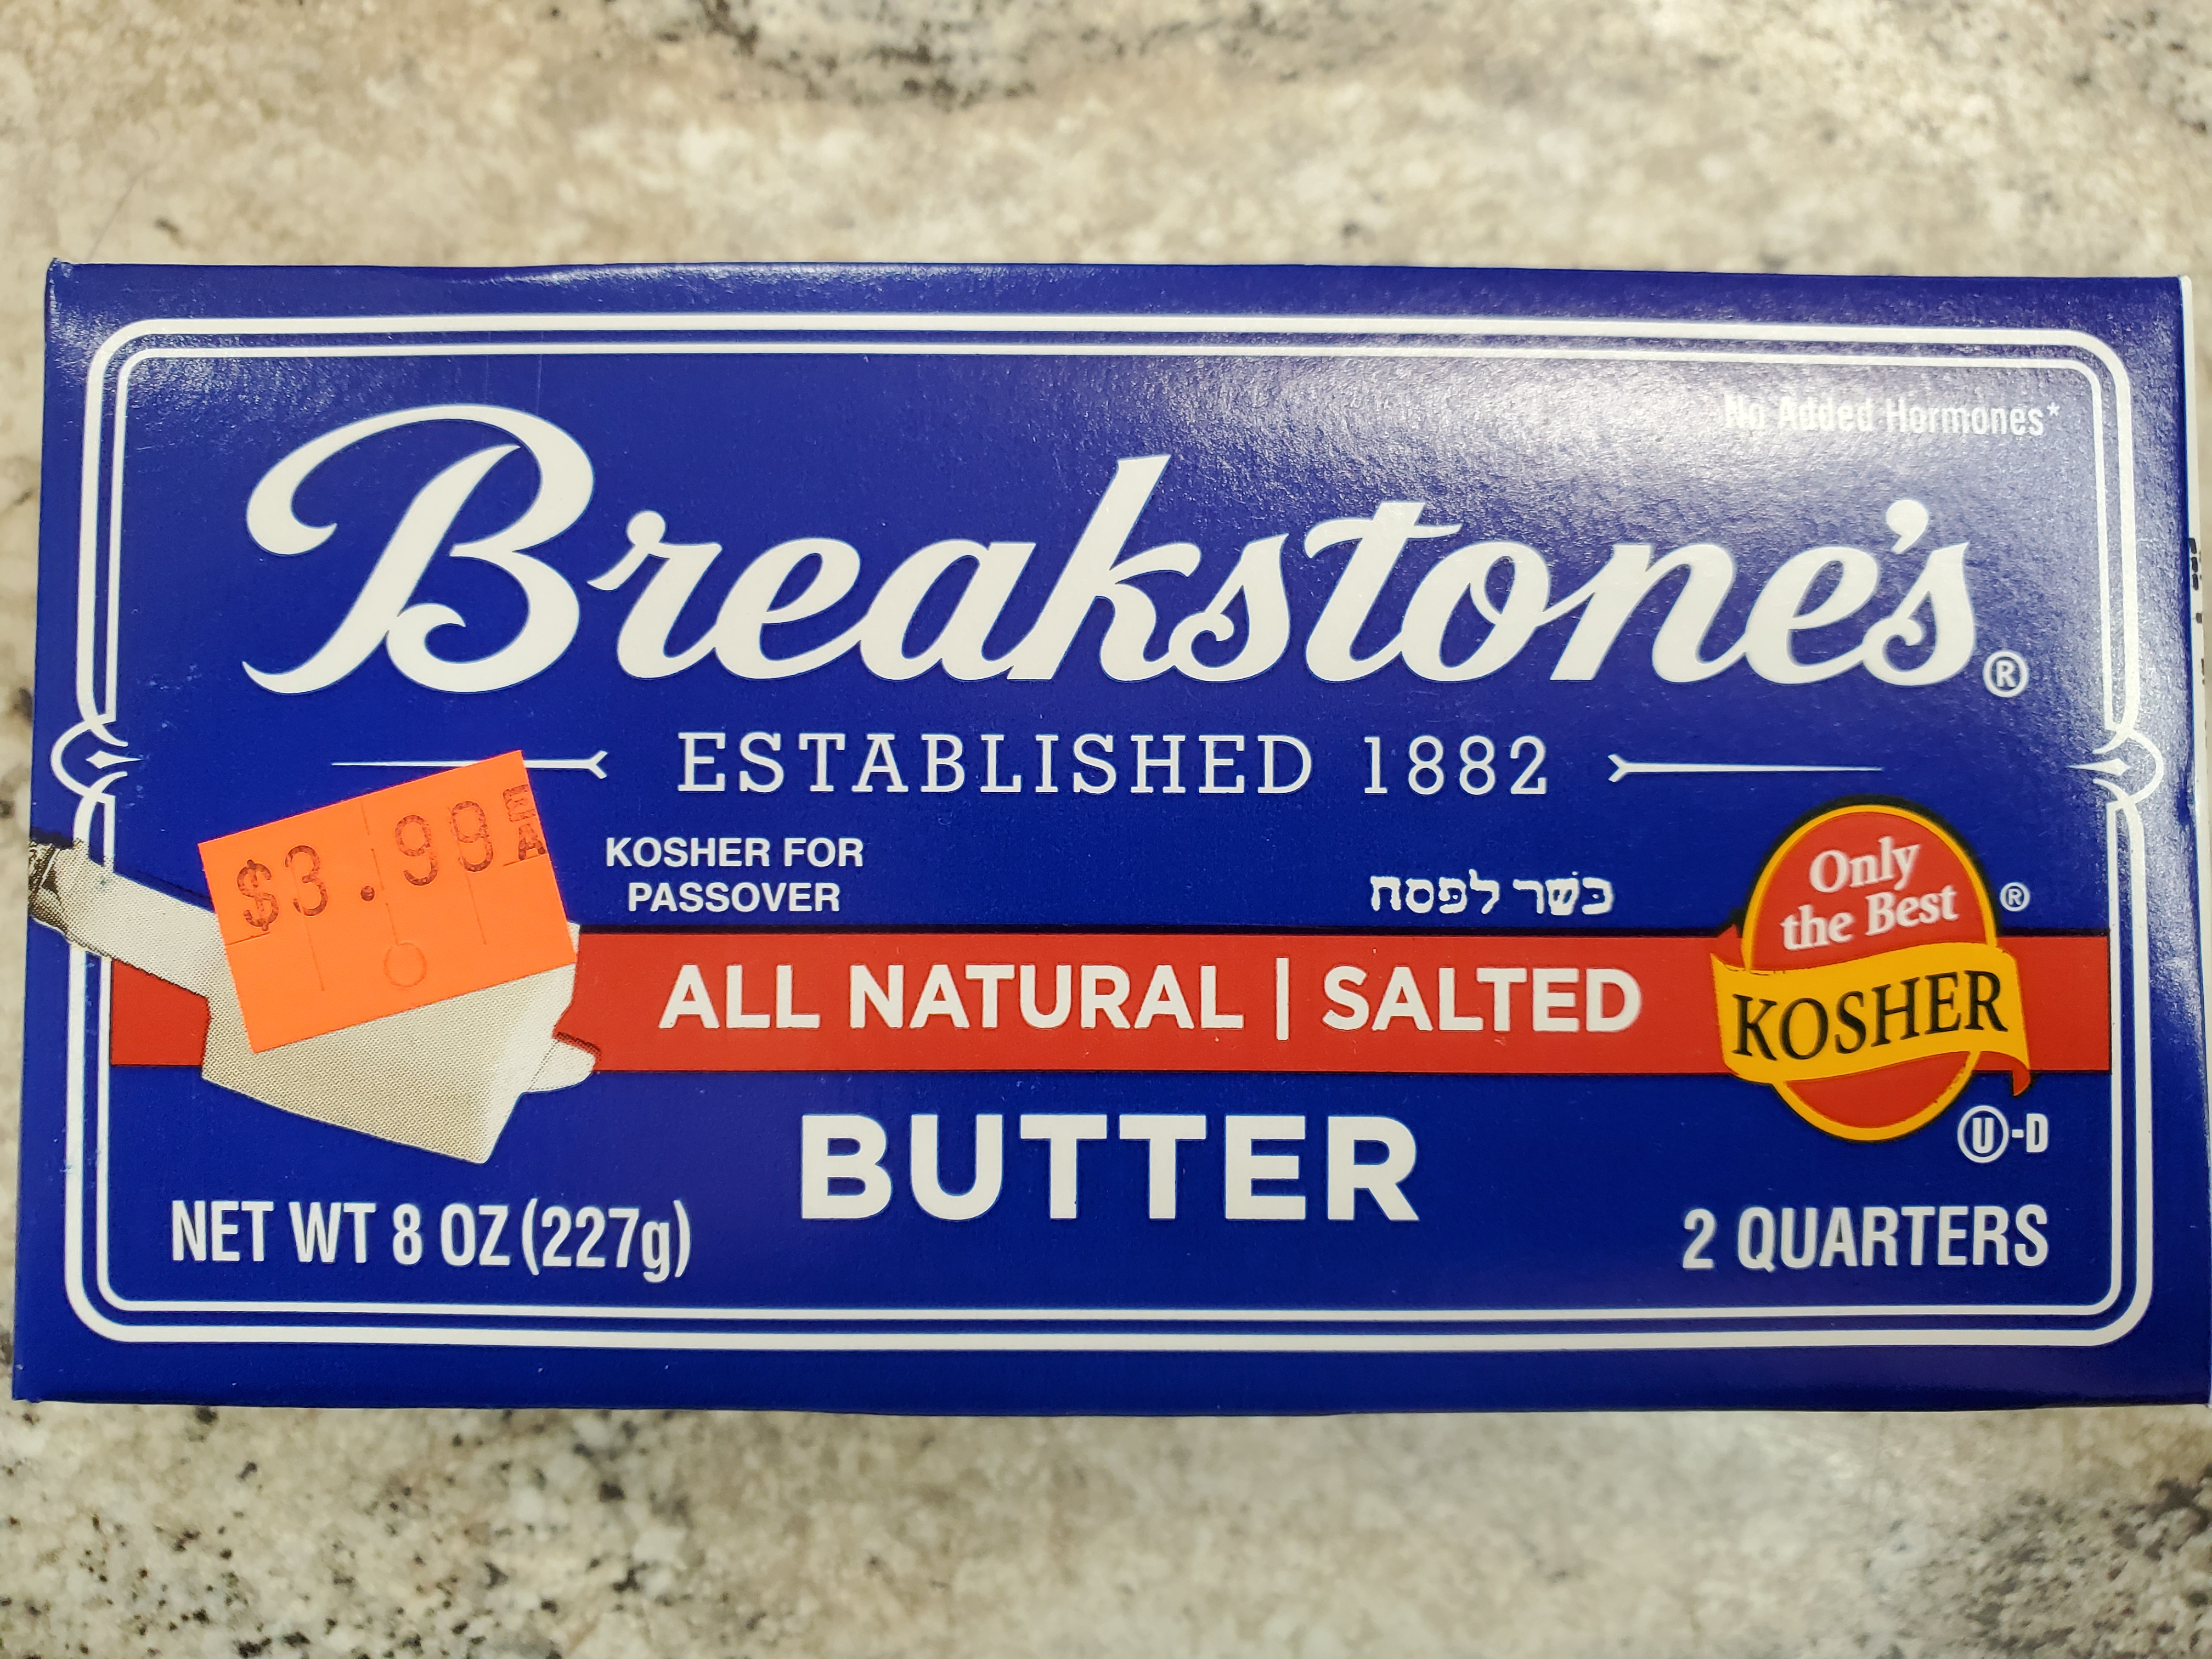 BREAKSTONE'S ALL NATURAL SALTED BUTTER 8 OZ